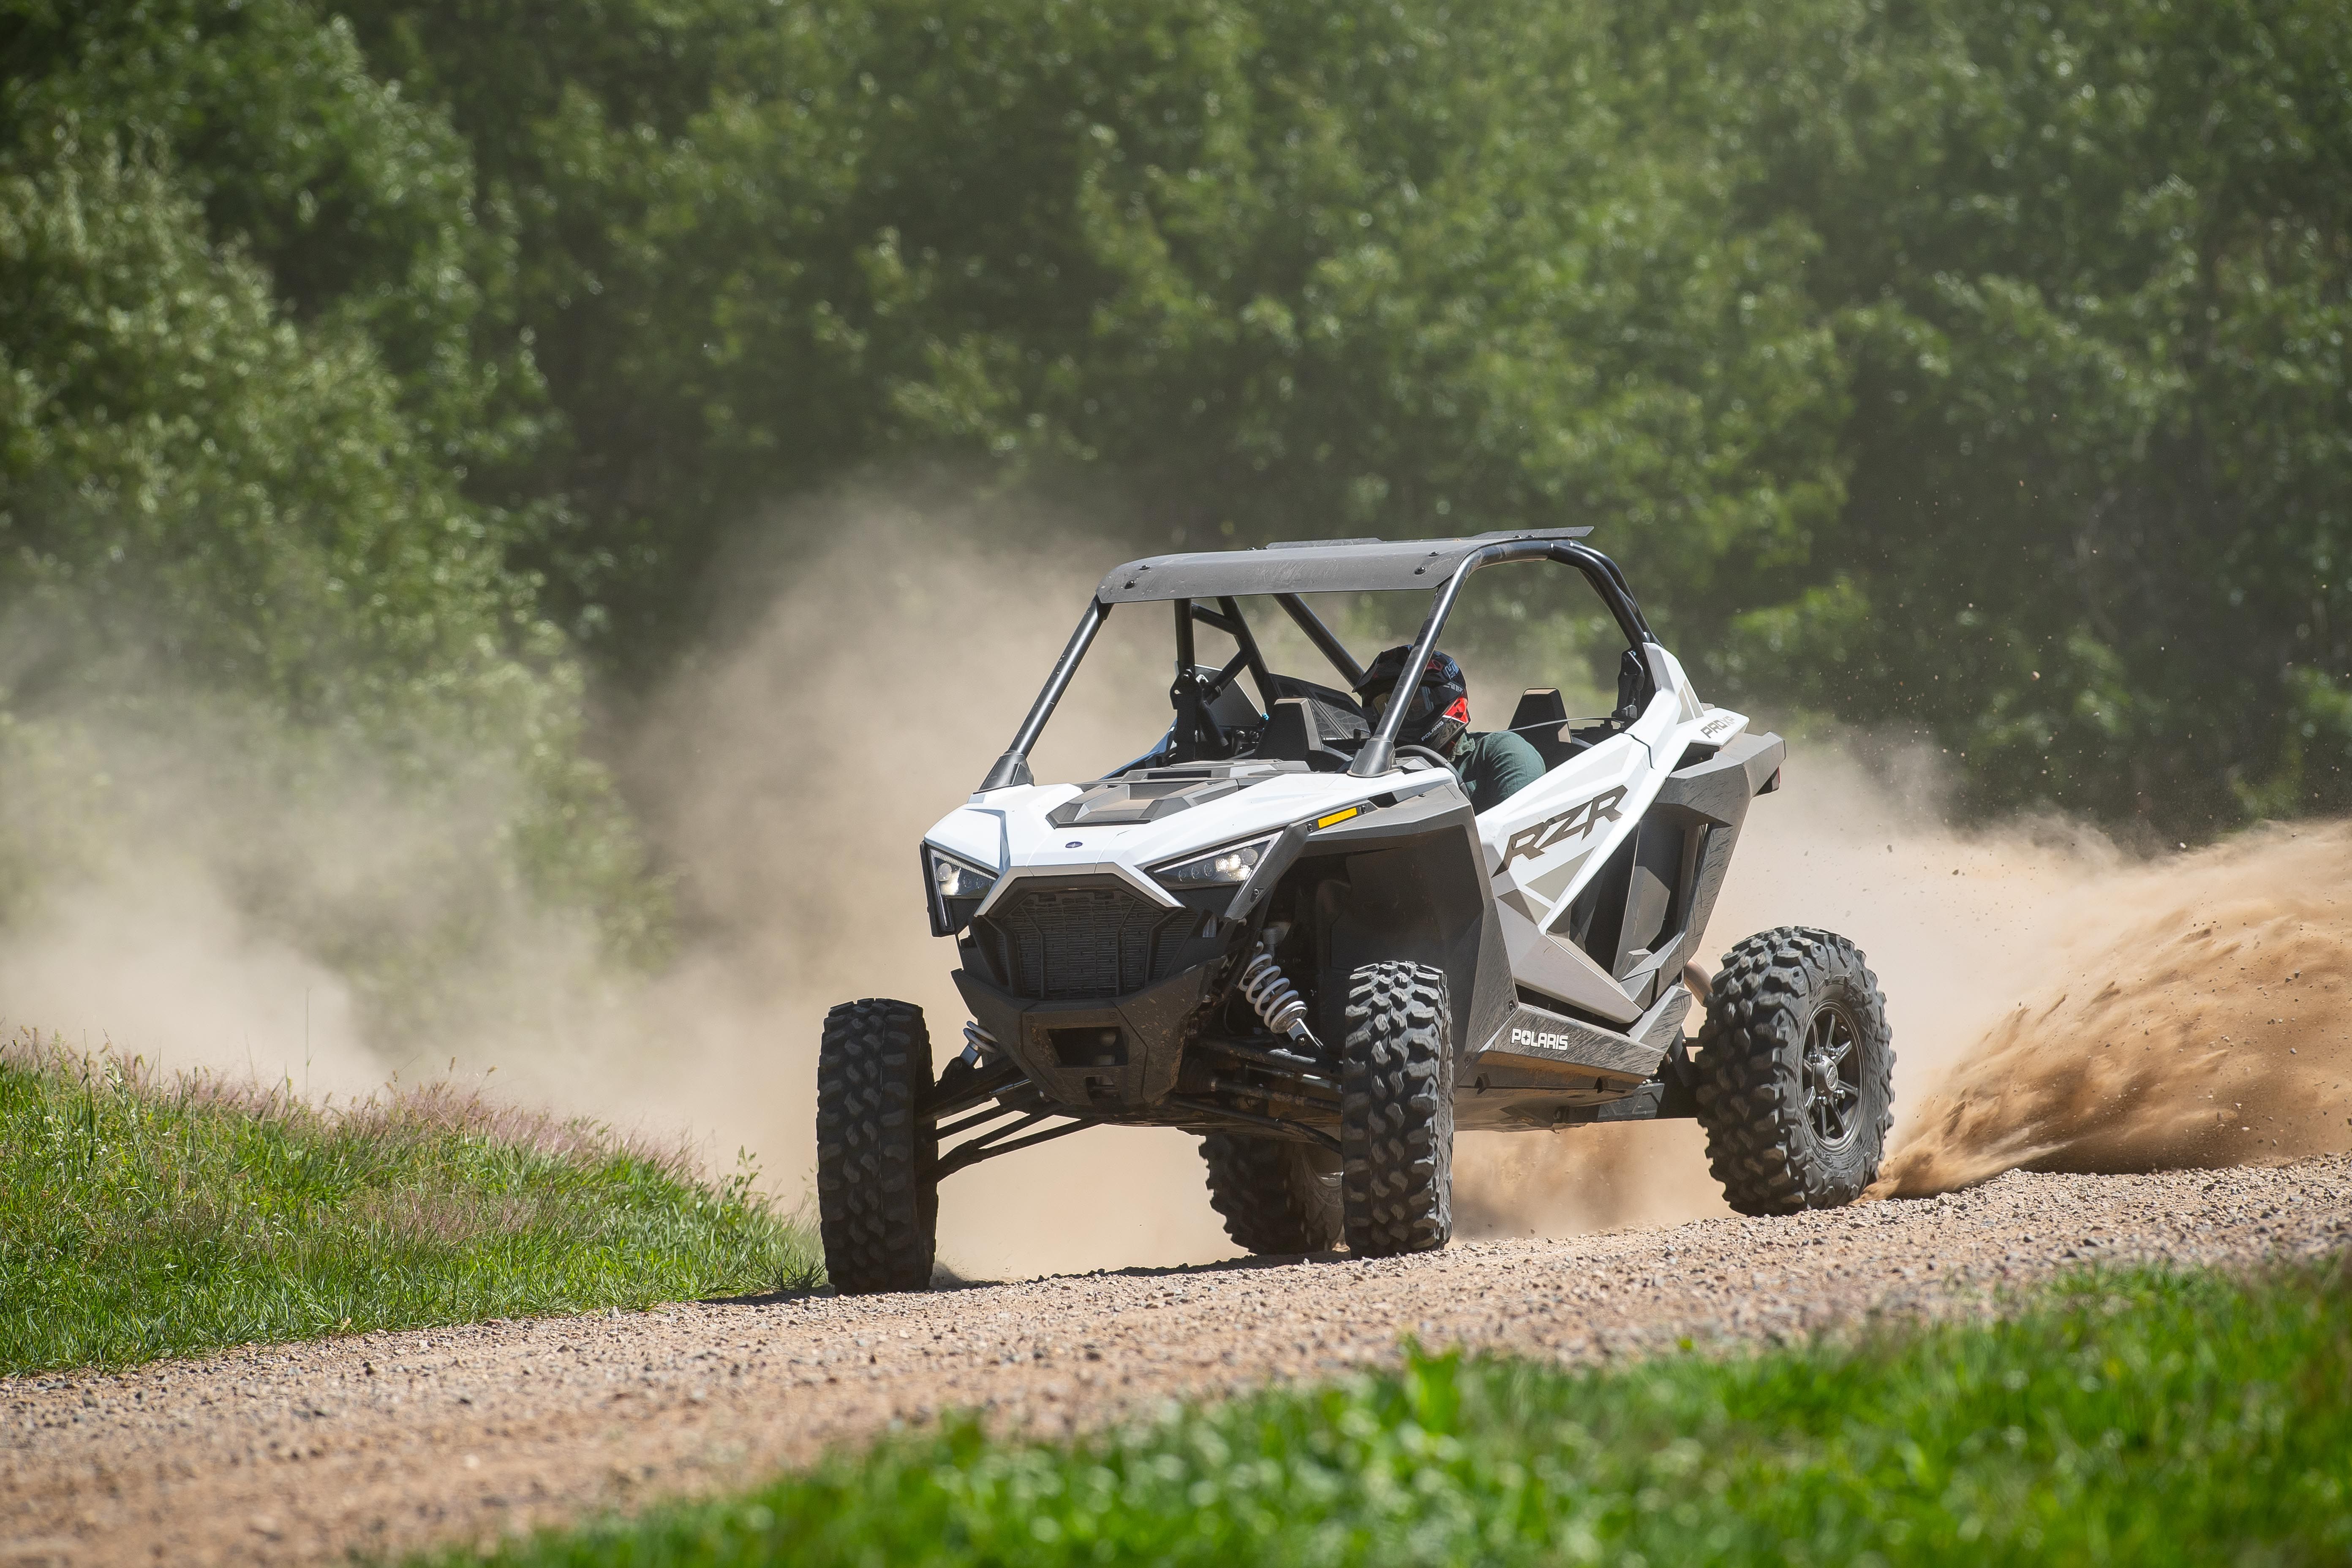 Polaris Rzr Side-by-Sides Make Me Want to Abandon My Rally Car